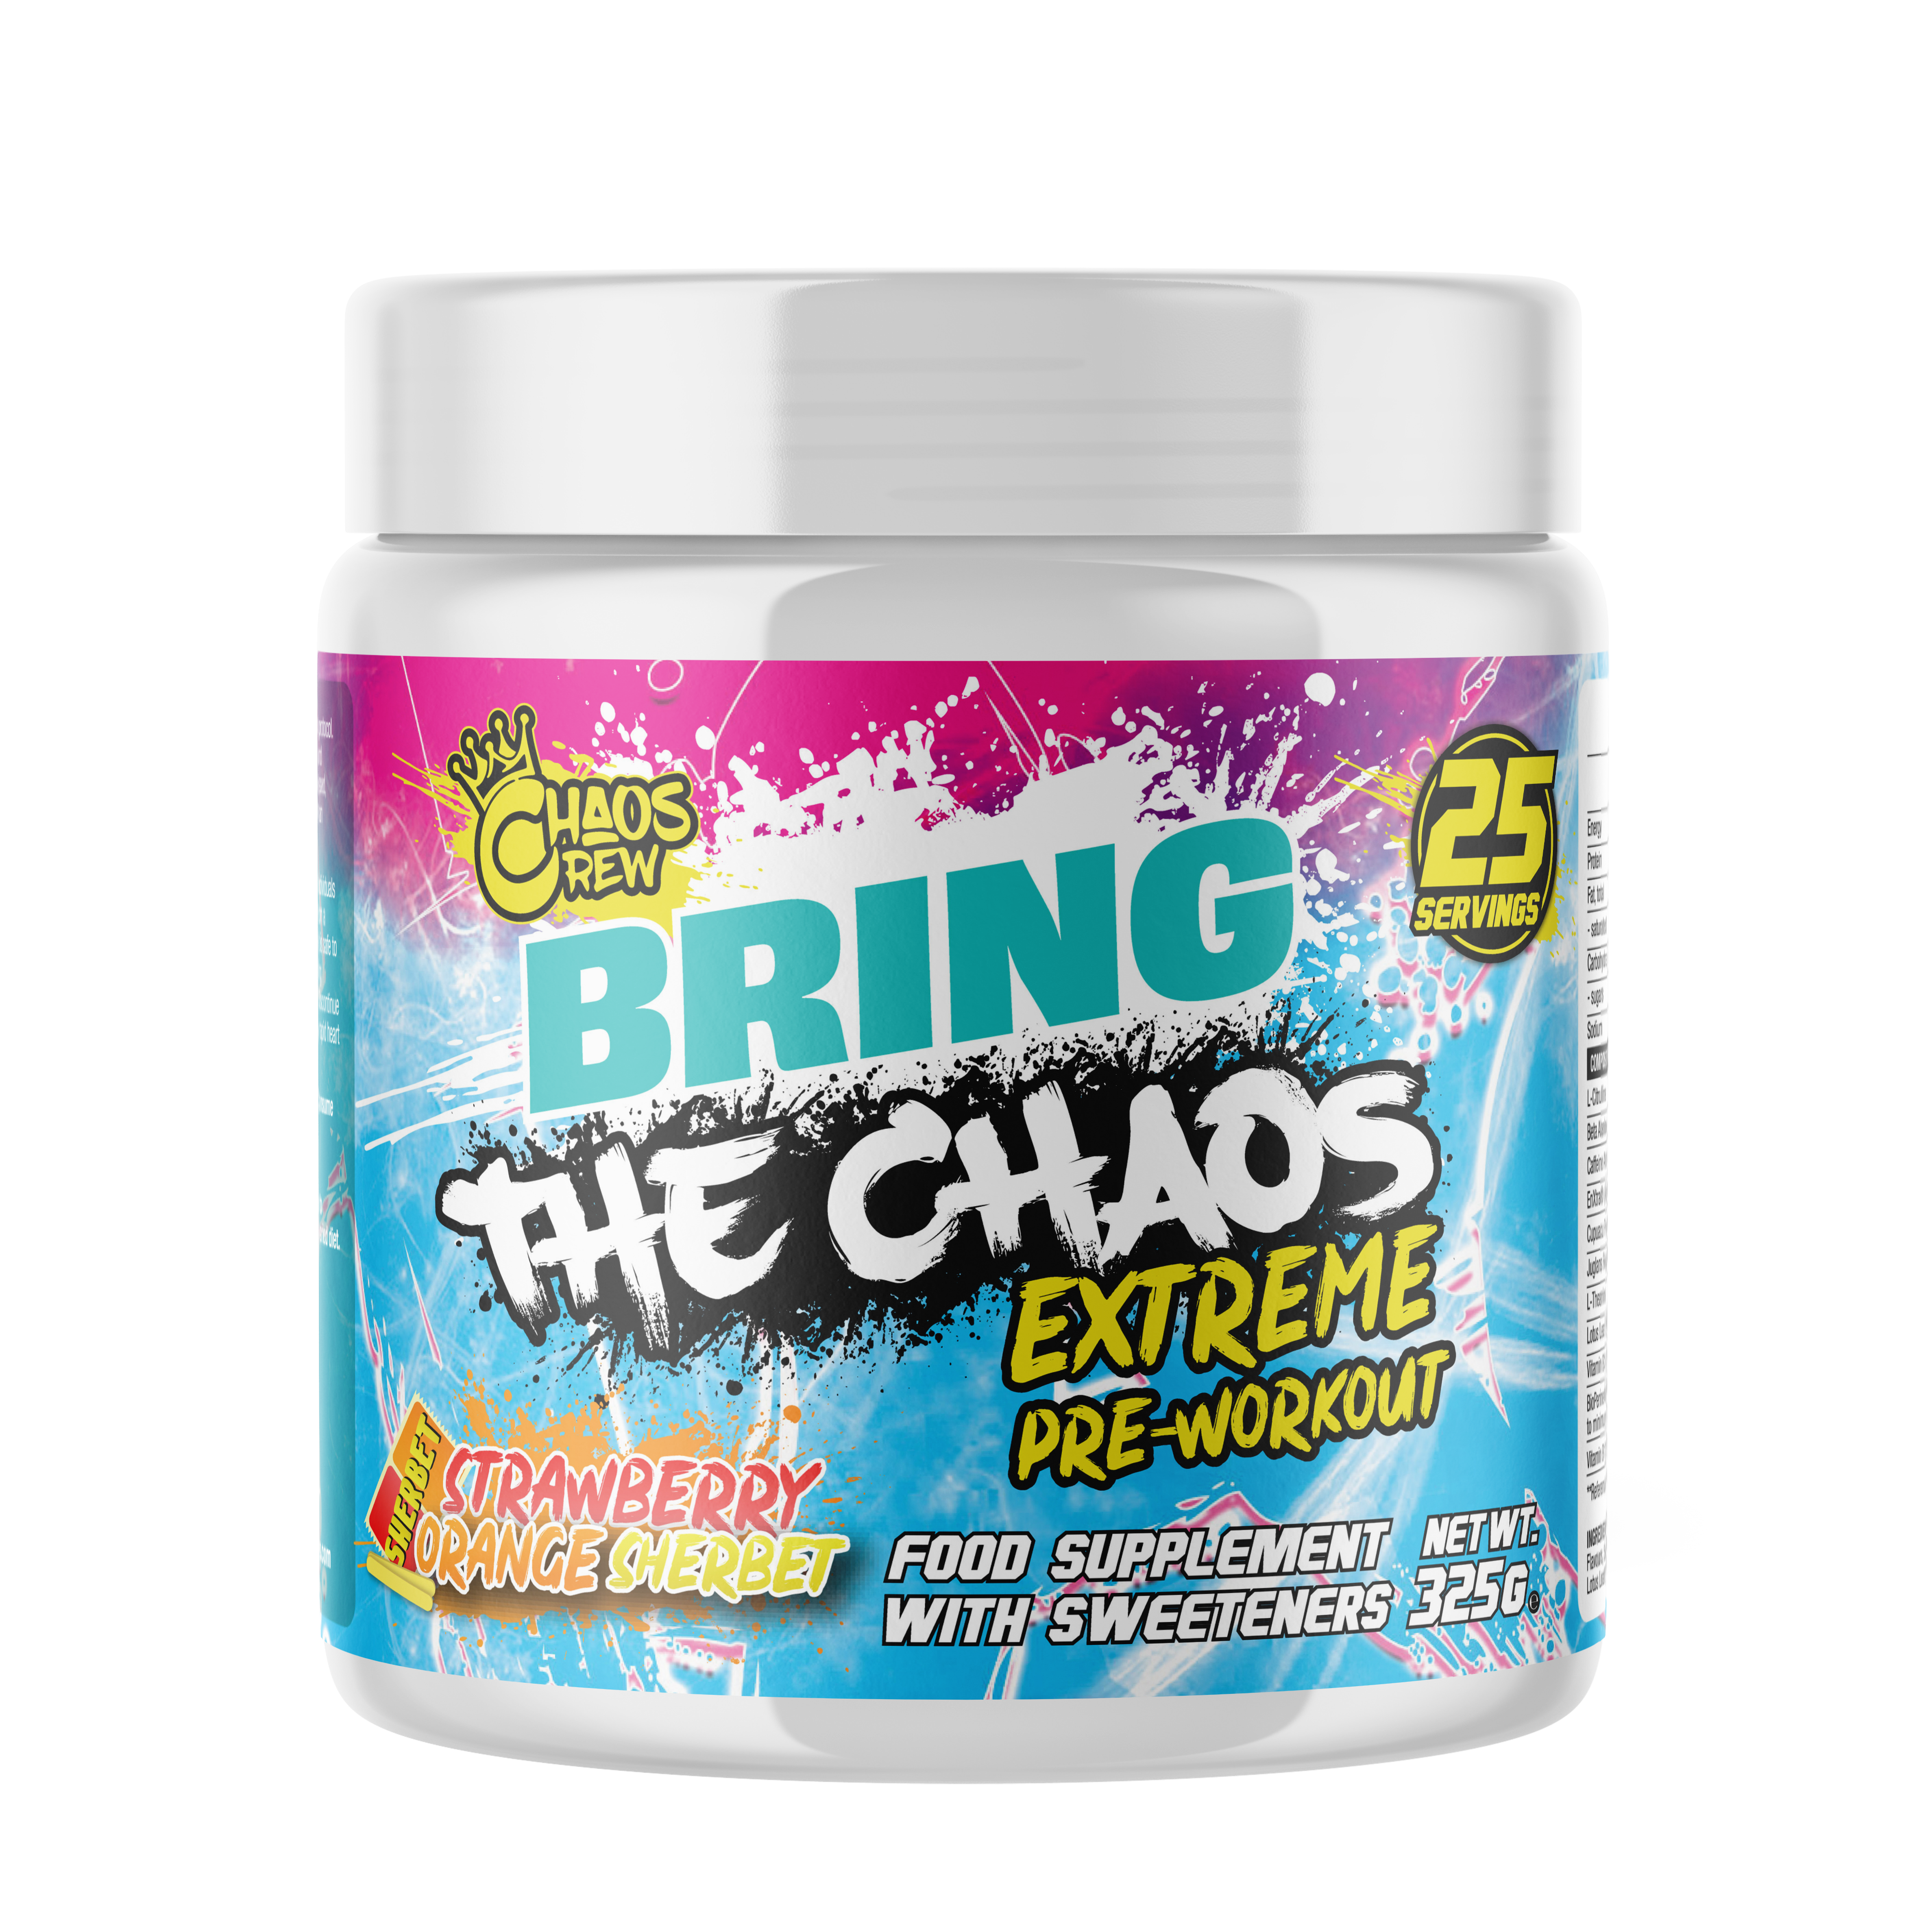 Chaos Crew Bring The Chaos EXTREME 325g - Pre Workout